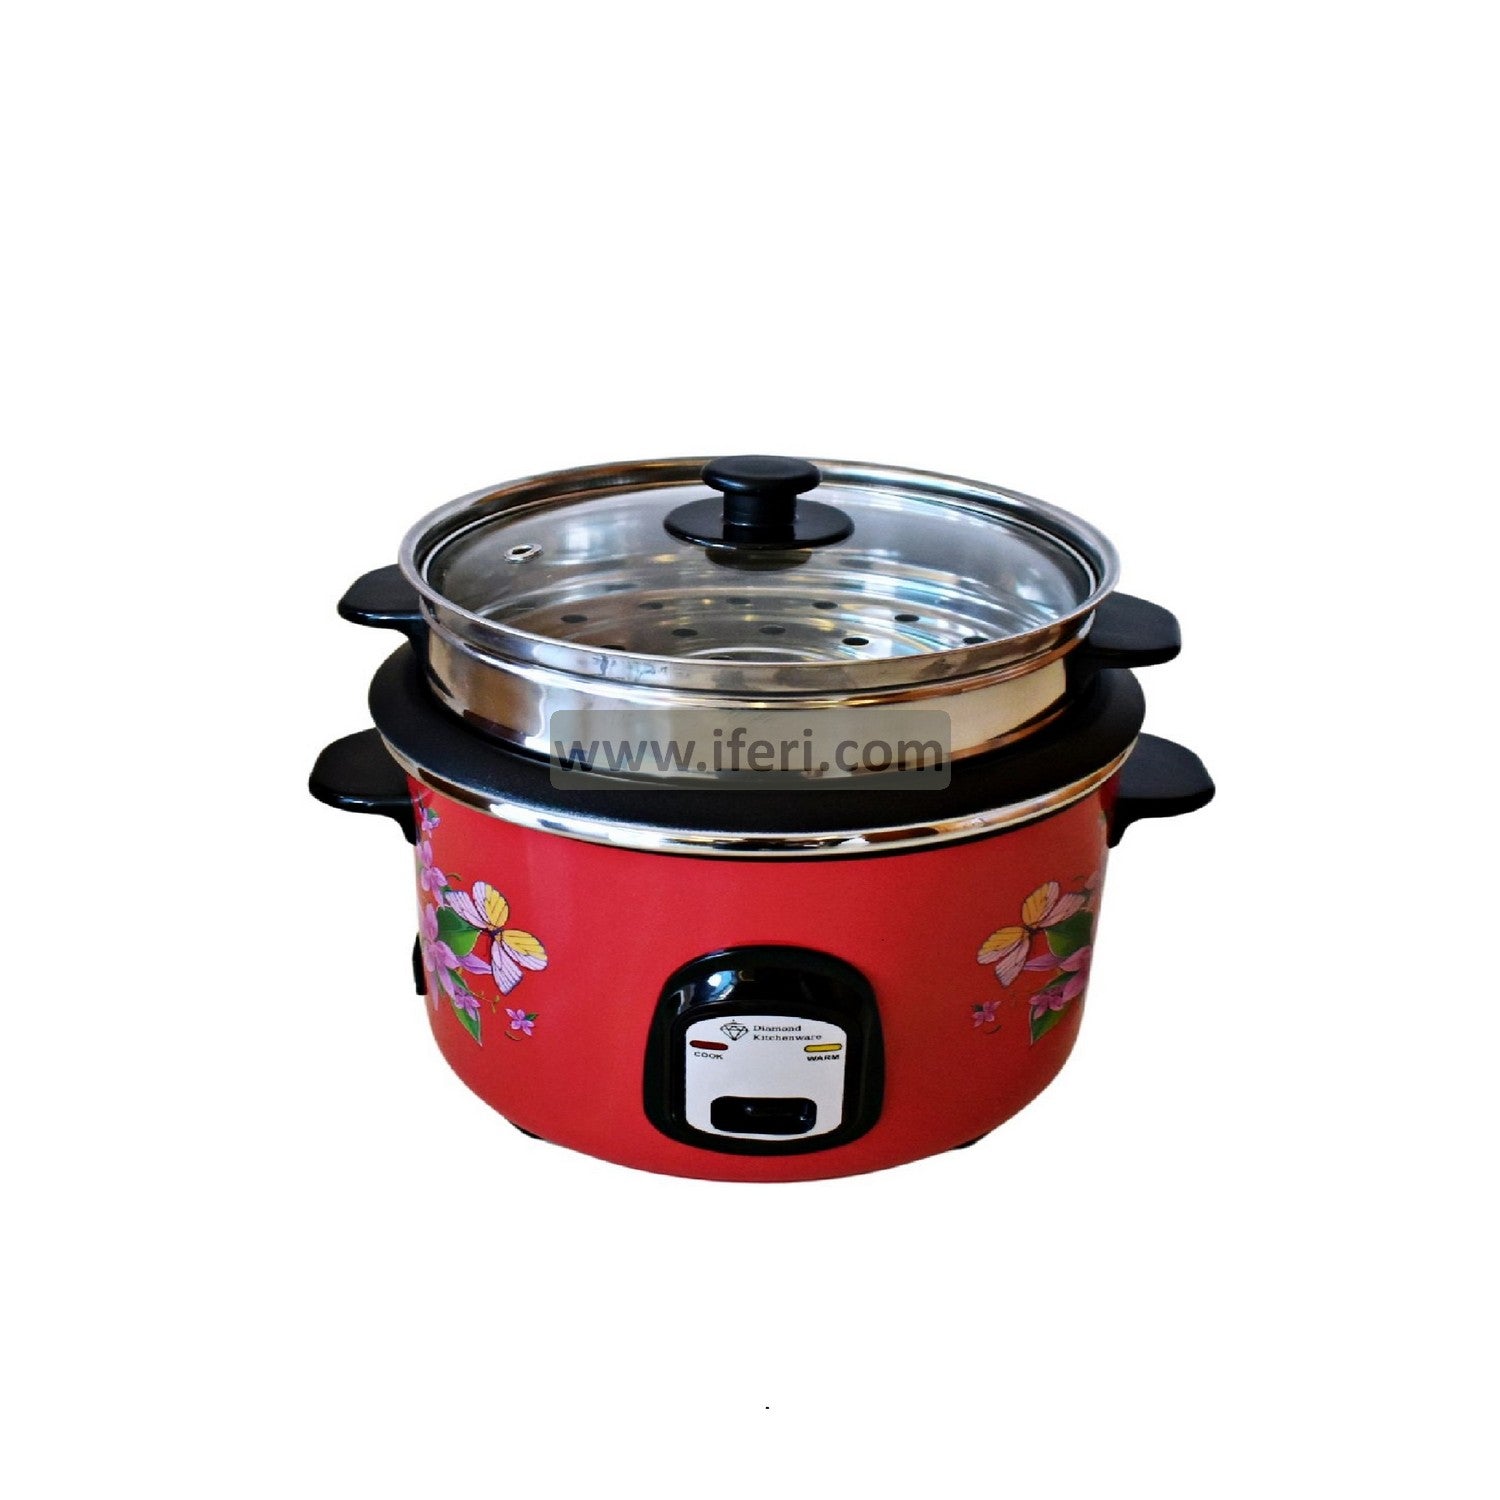 1.8 LTR Diamond Double Pot Electric Rice Cooker Red DKRC08